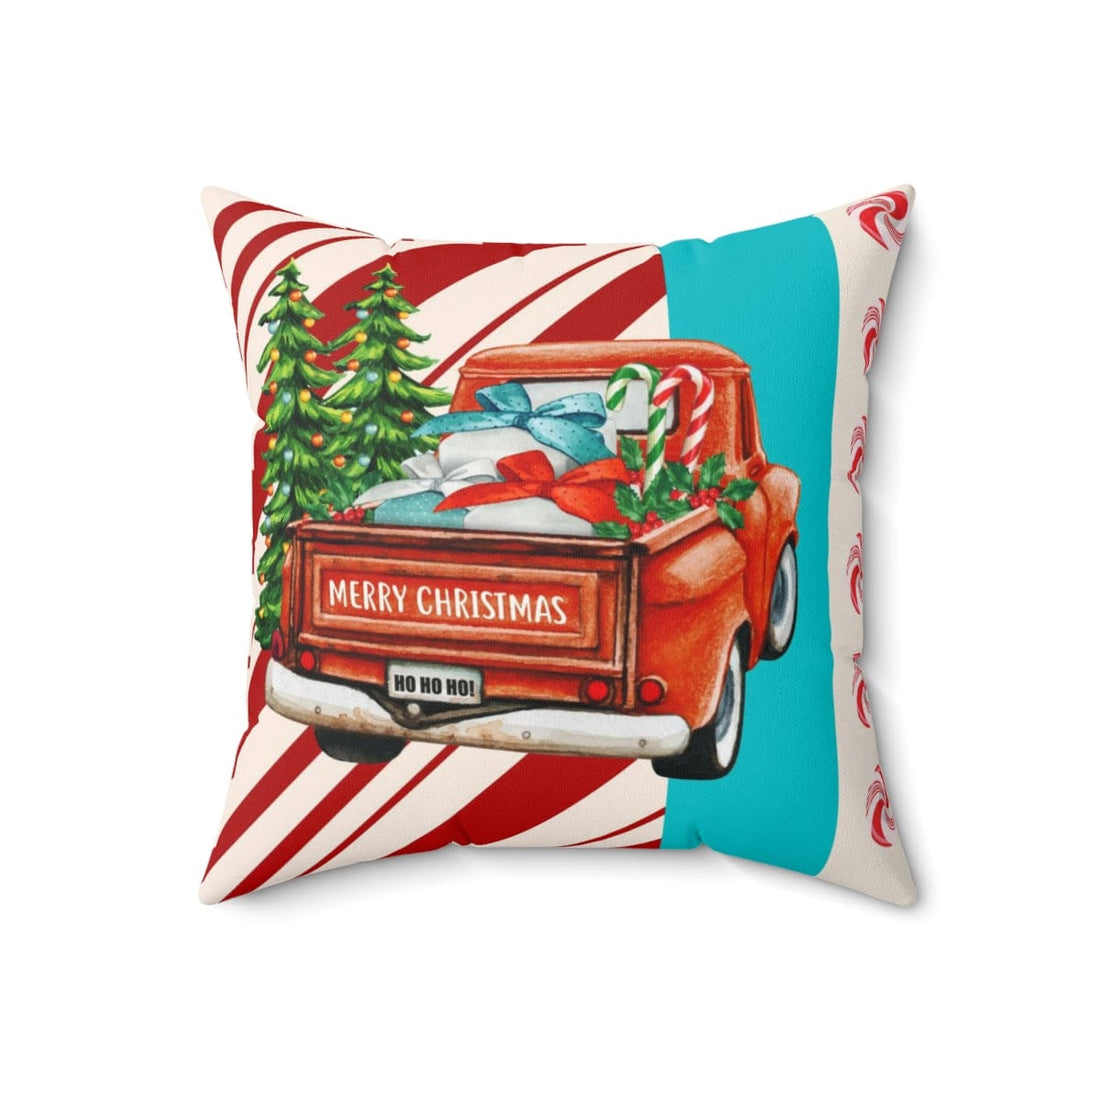 Mid Century Christmas, Old Timey Red Pick Up Truck, Merry Christmas, Candy Cane Stripe, Aqua Blue, Retro Holiday Gift Pillow And Insert Home Decor